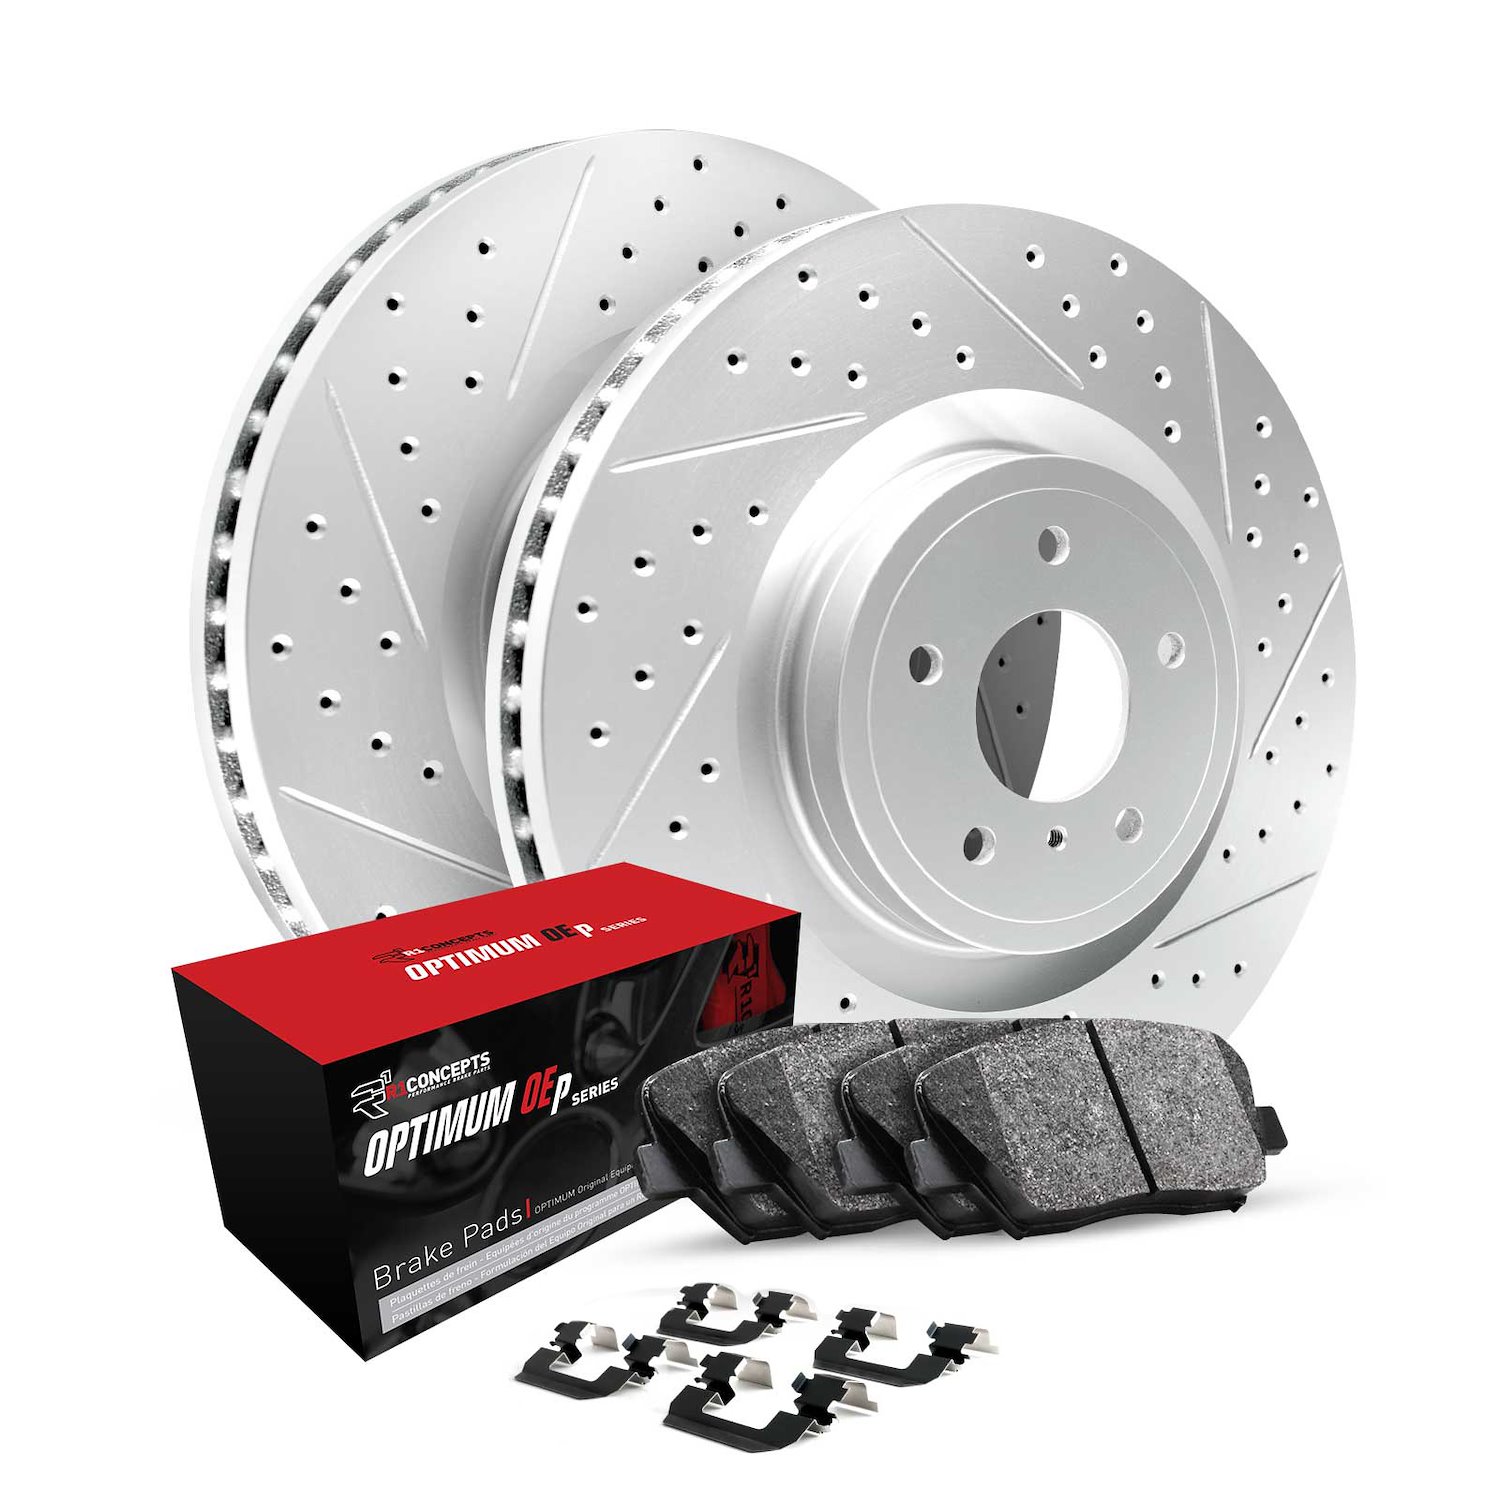 GEO-Carbon Drilled/Slotted Rotors w/Optimum OE Pads/Hardware, 1991-1999 Fits Multiple Makes/Models, Position: Rear